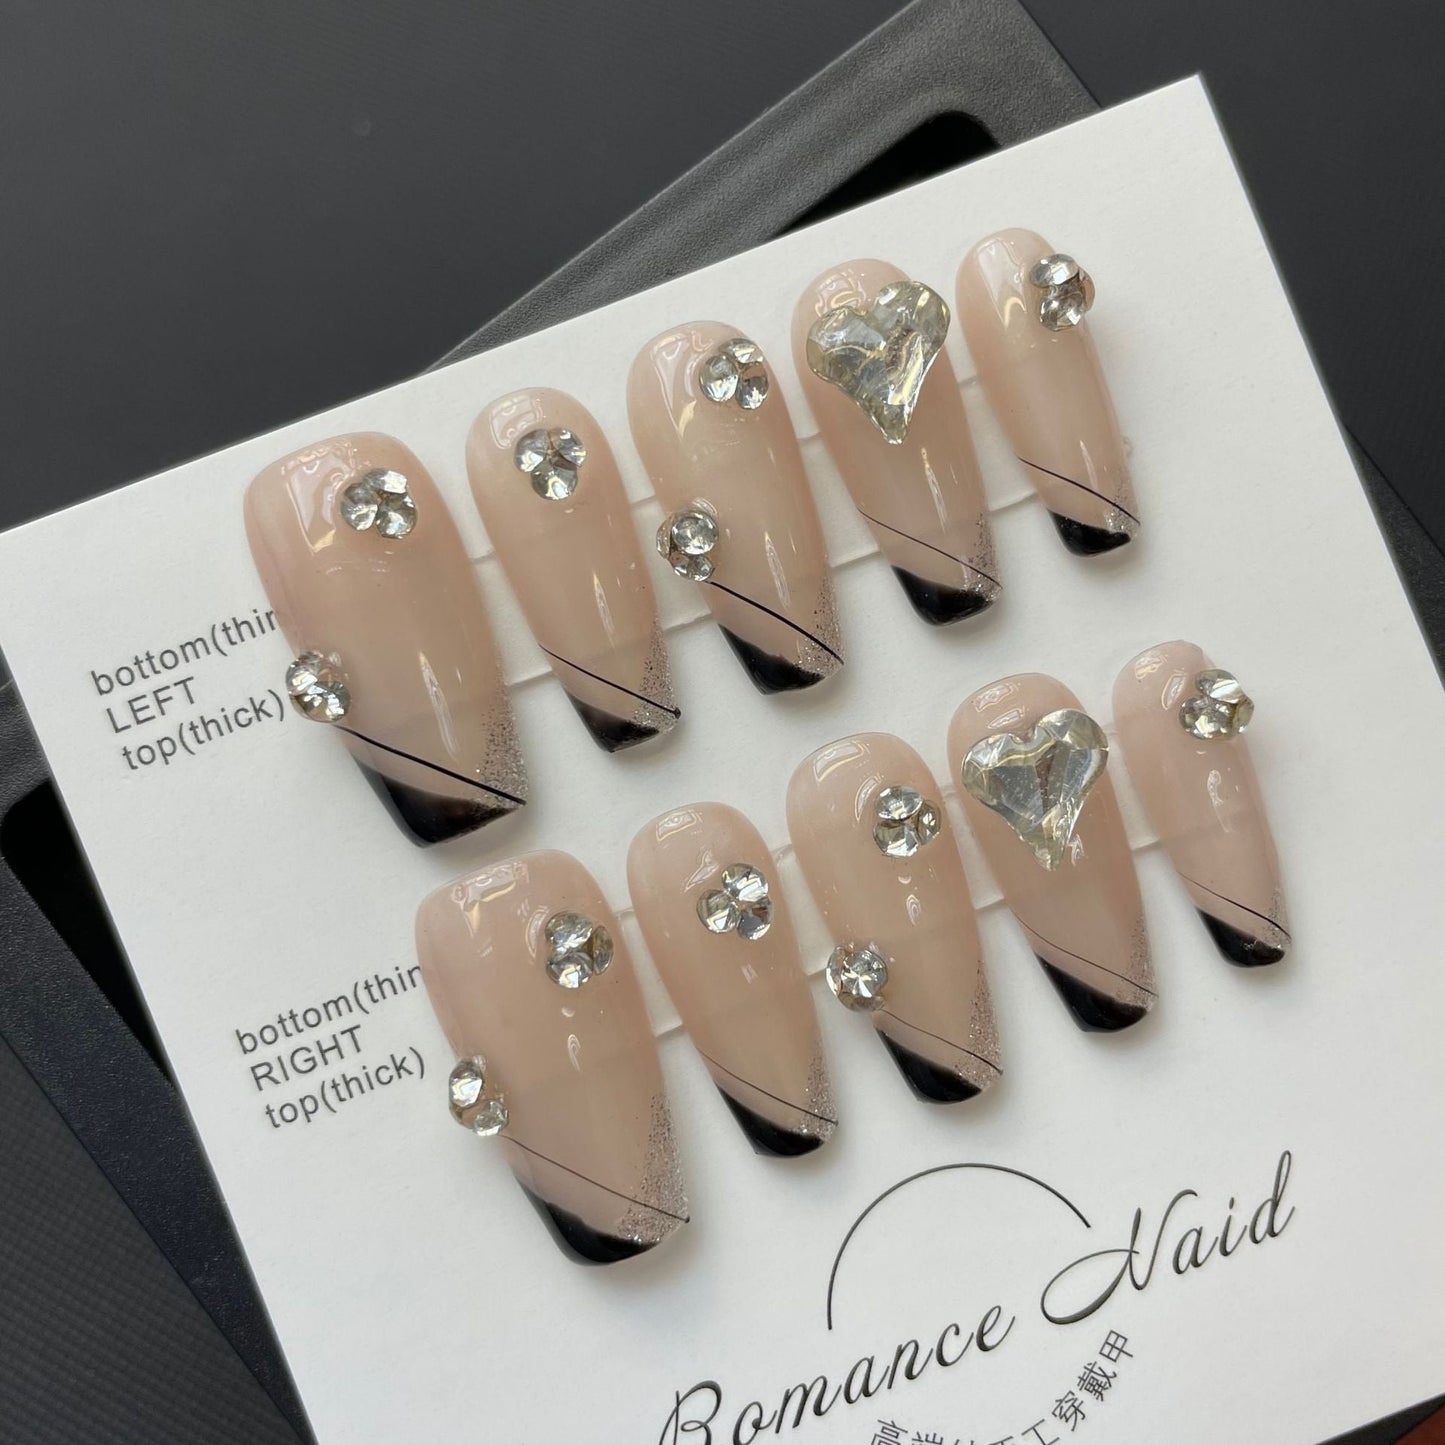 654 French style press on nails 100% handmade false nails nude color black